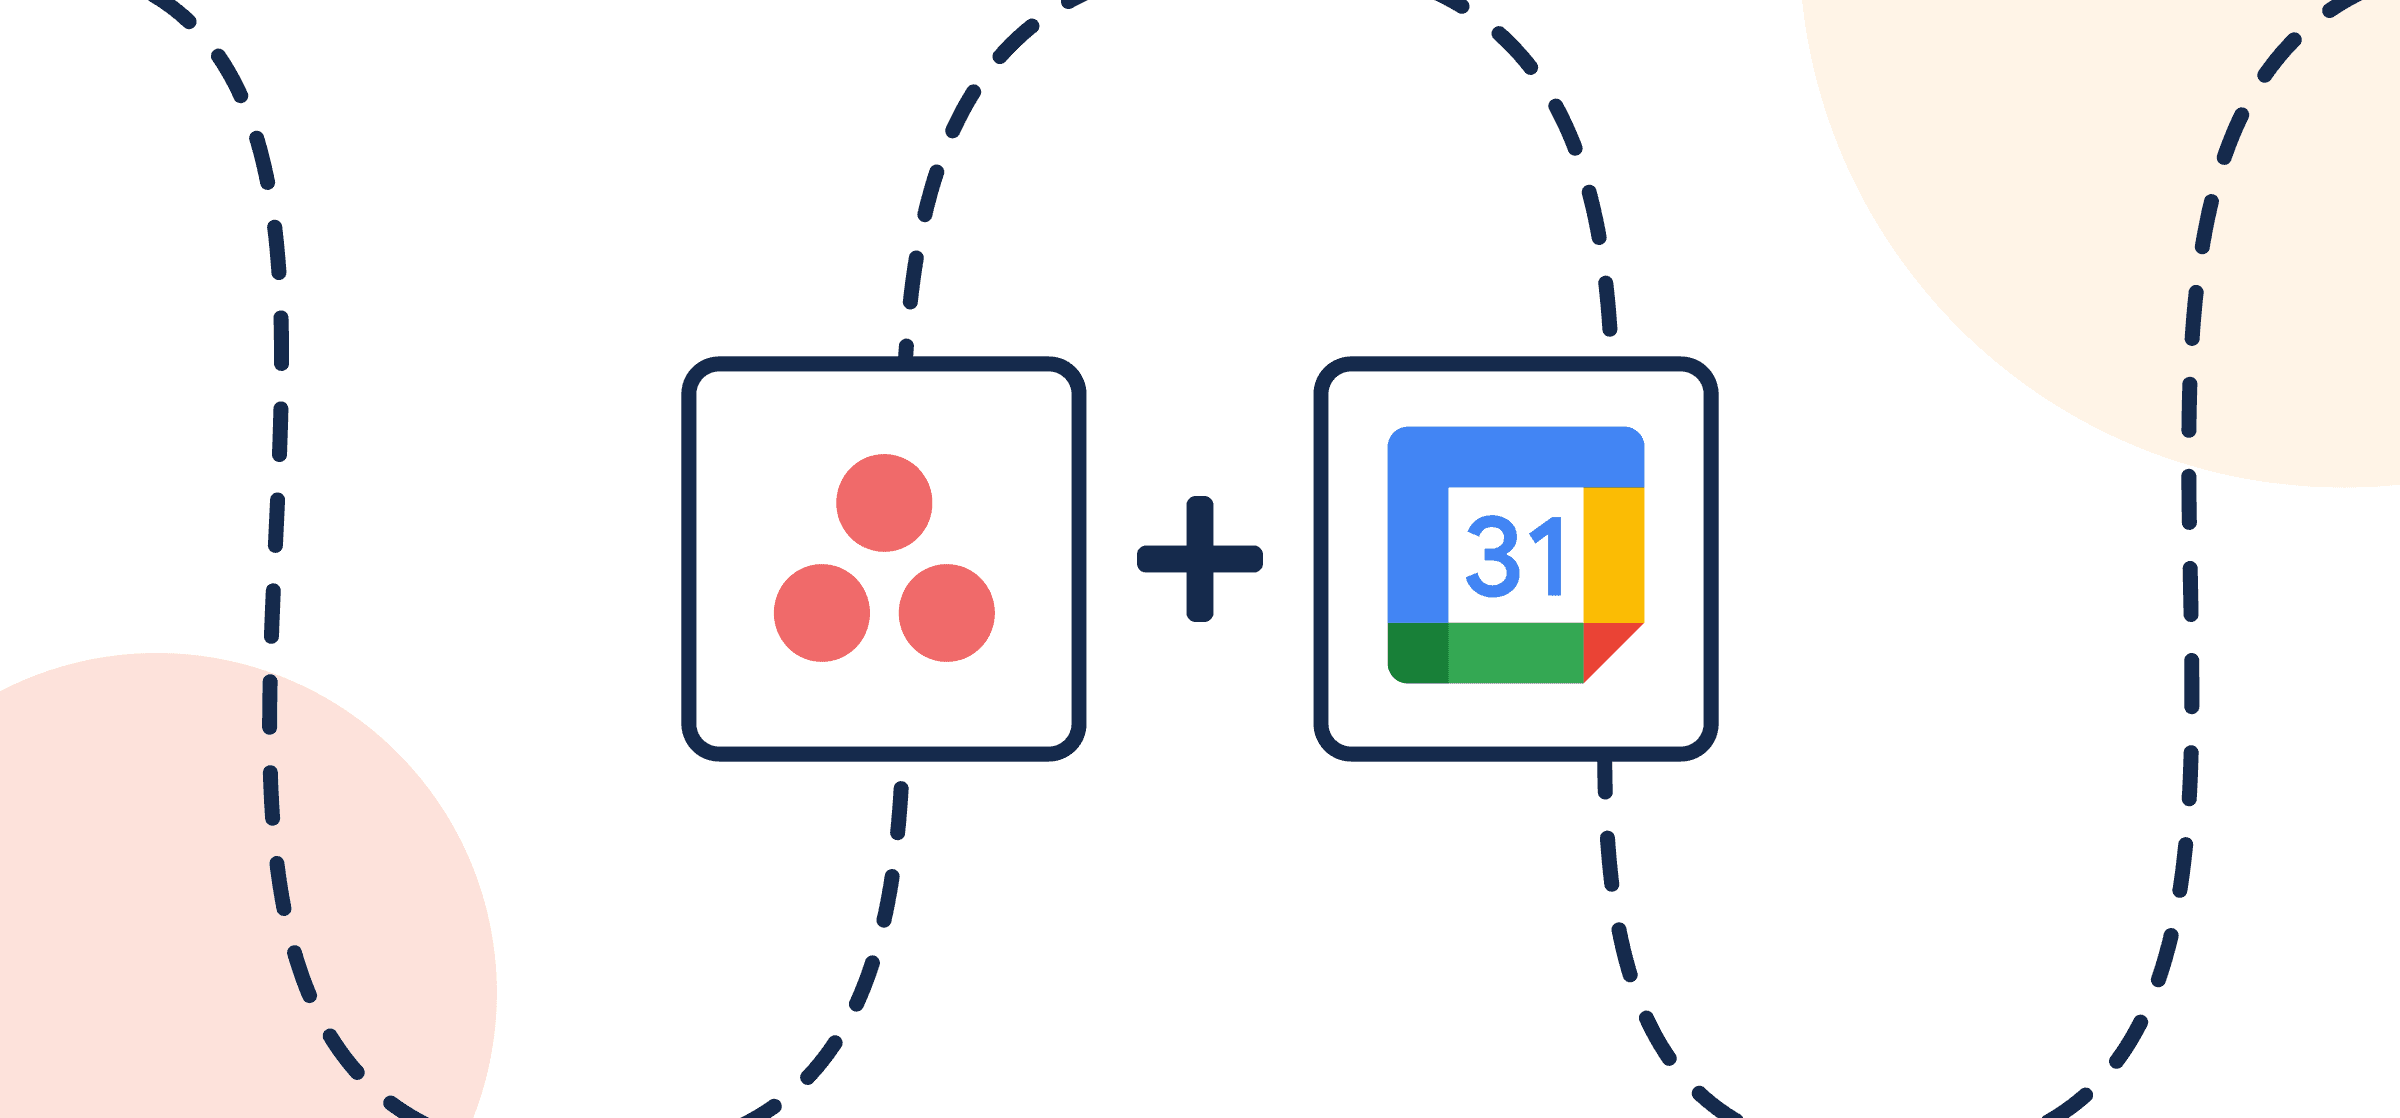 Featured image illustrating a step-by-step guide on syncing Asana to Google Calendar through Unito, depicted by the connected logos through circles and dotted lines.